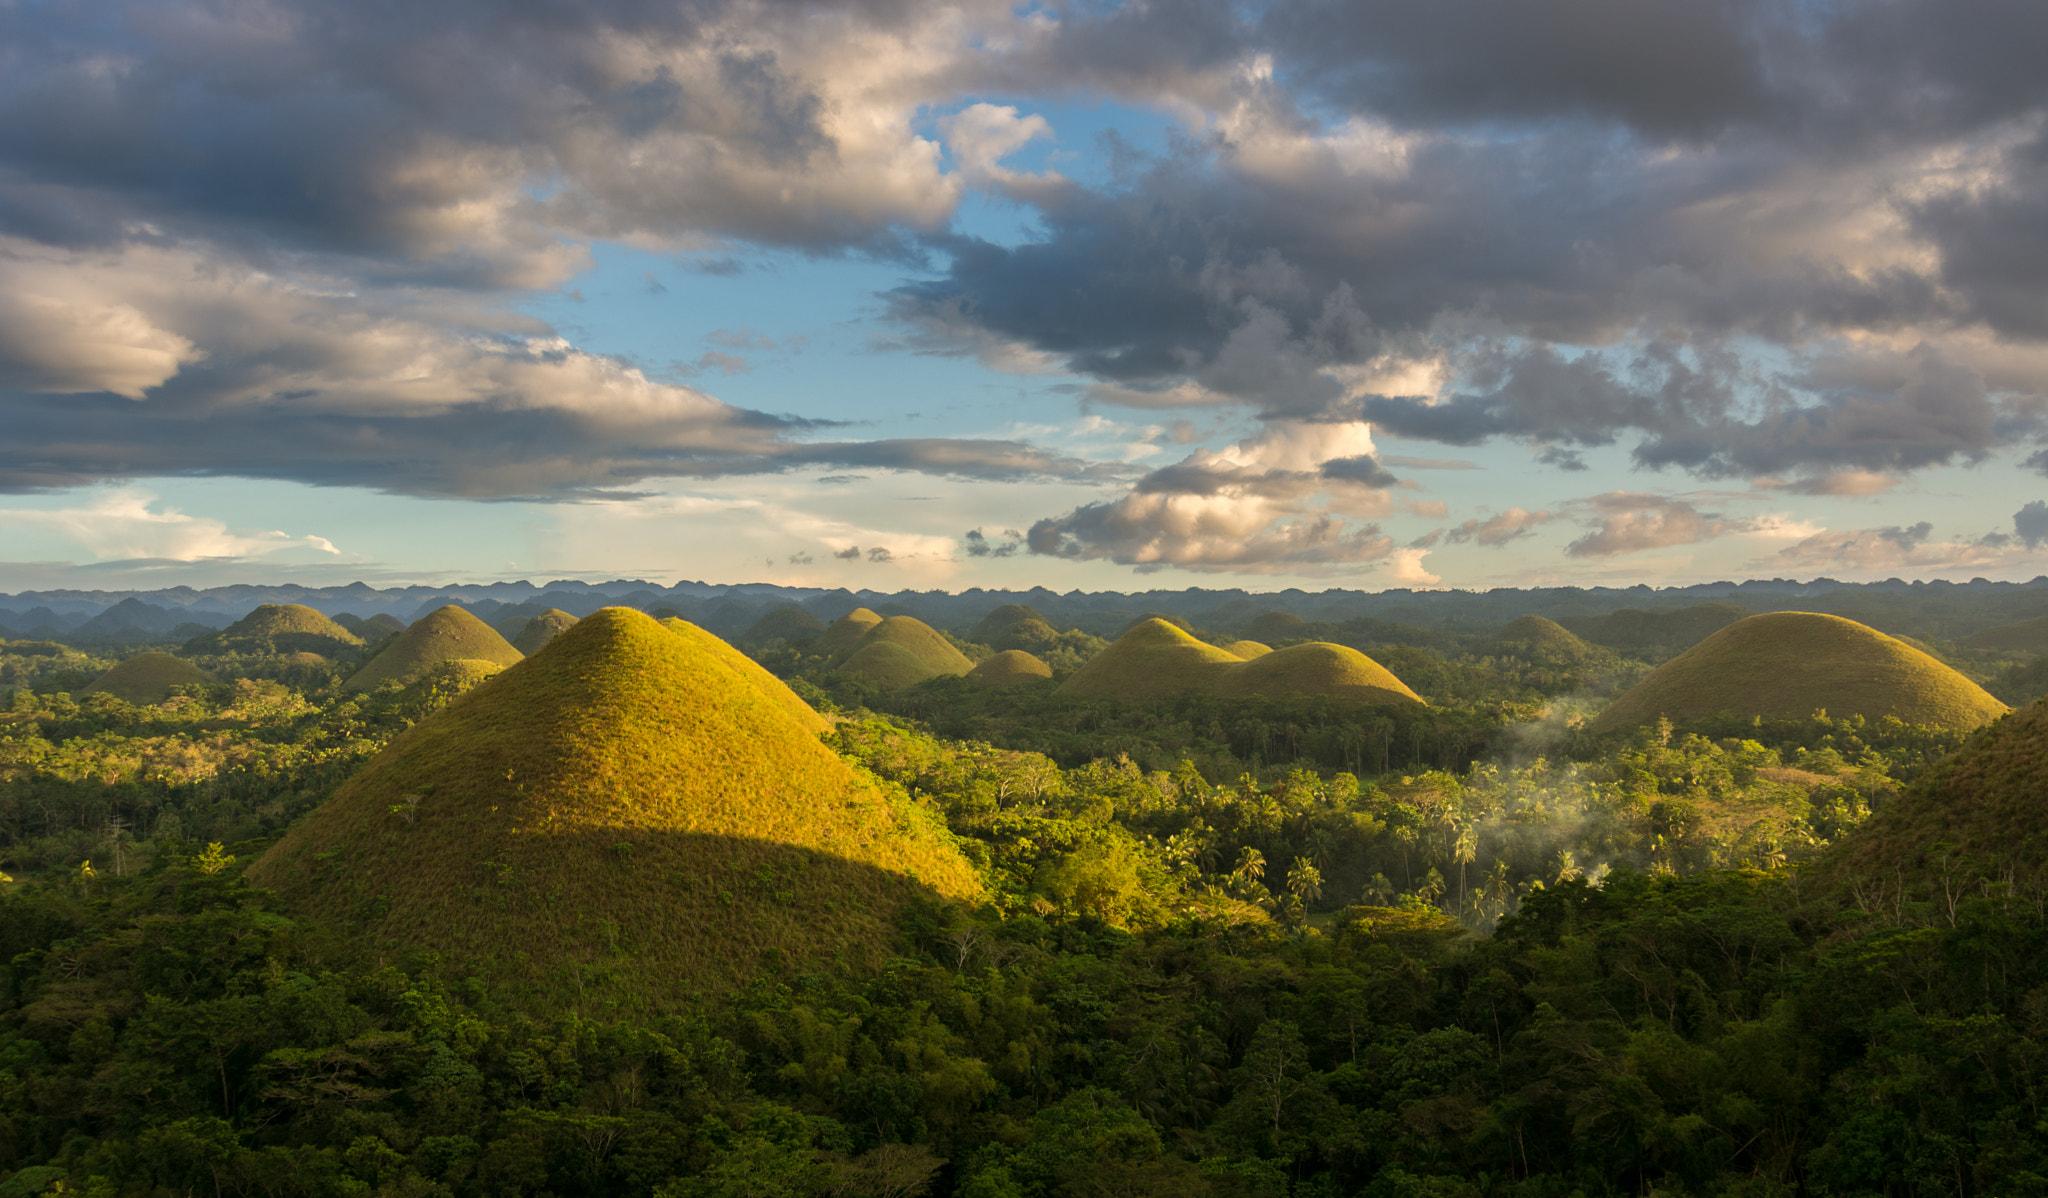 Chocolate hills in Bohol, deliciously awesome!